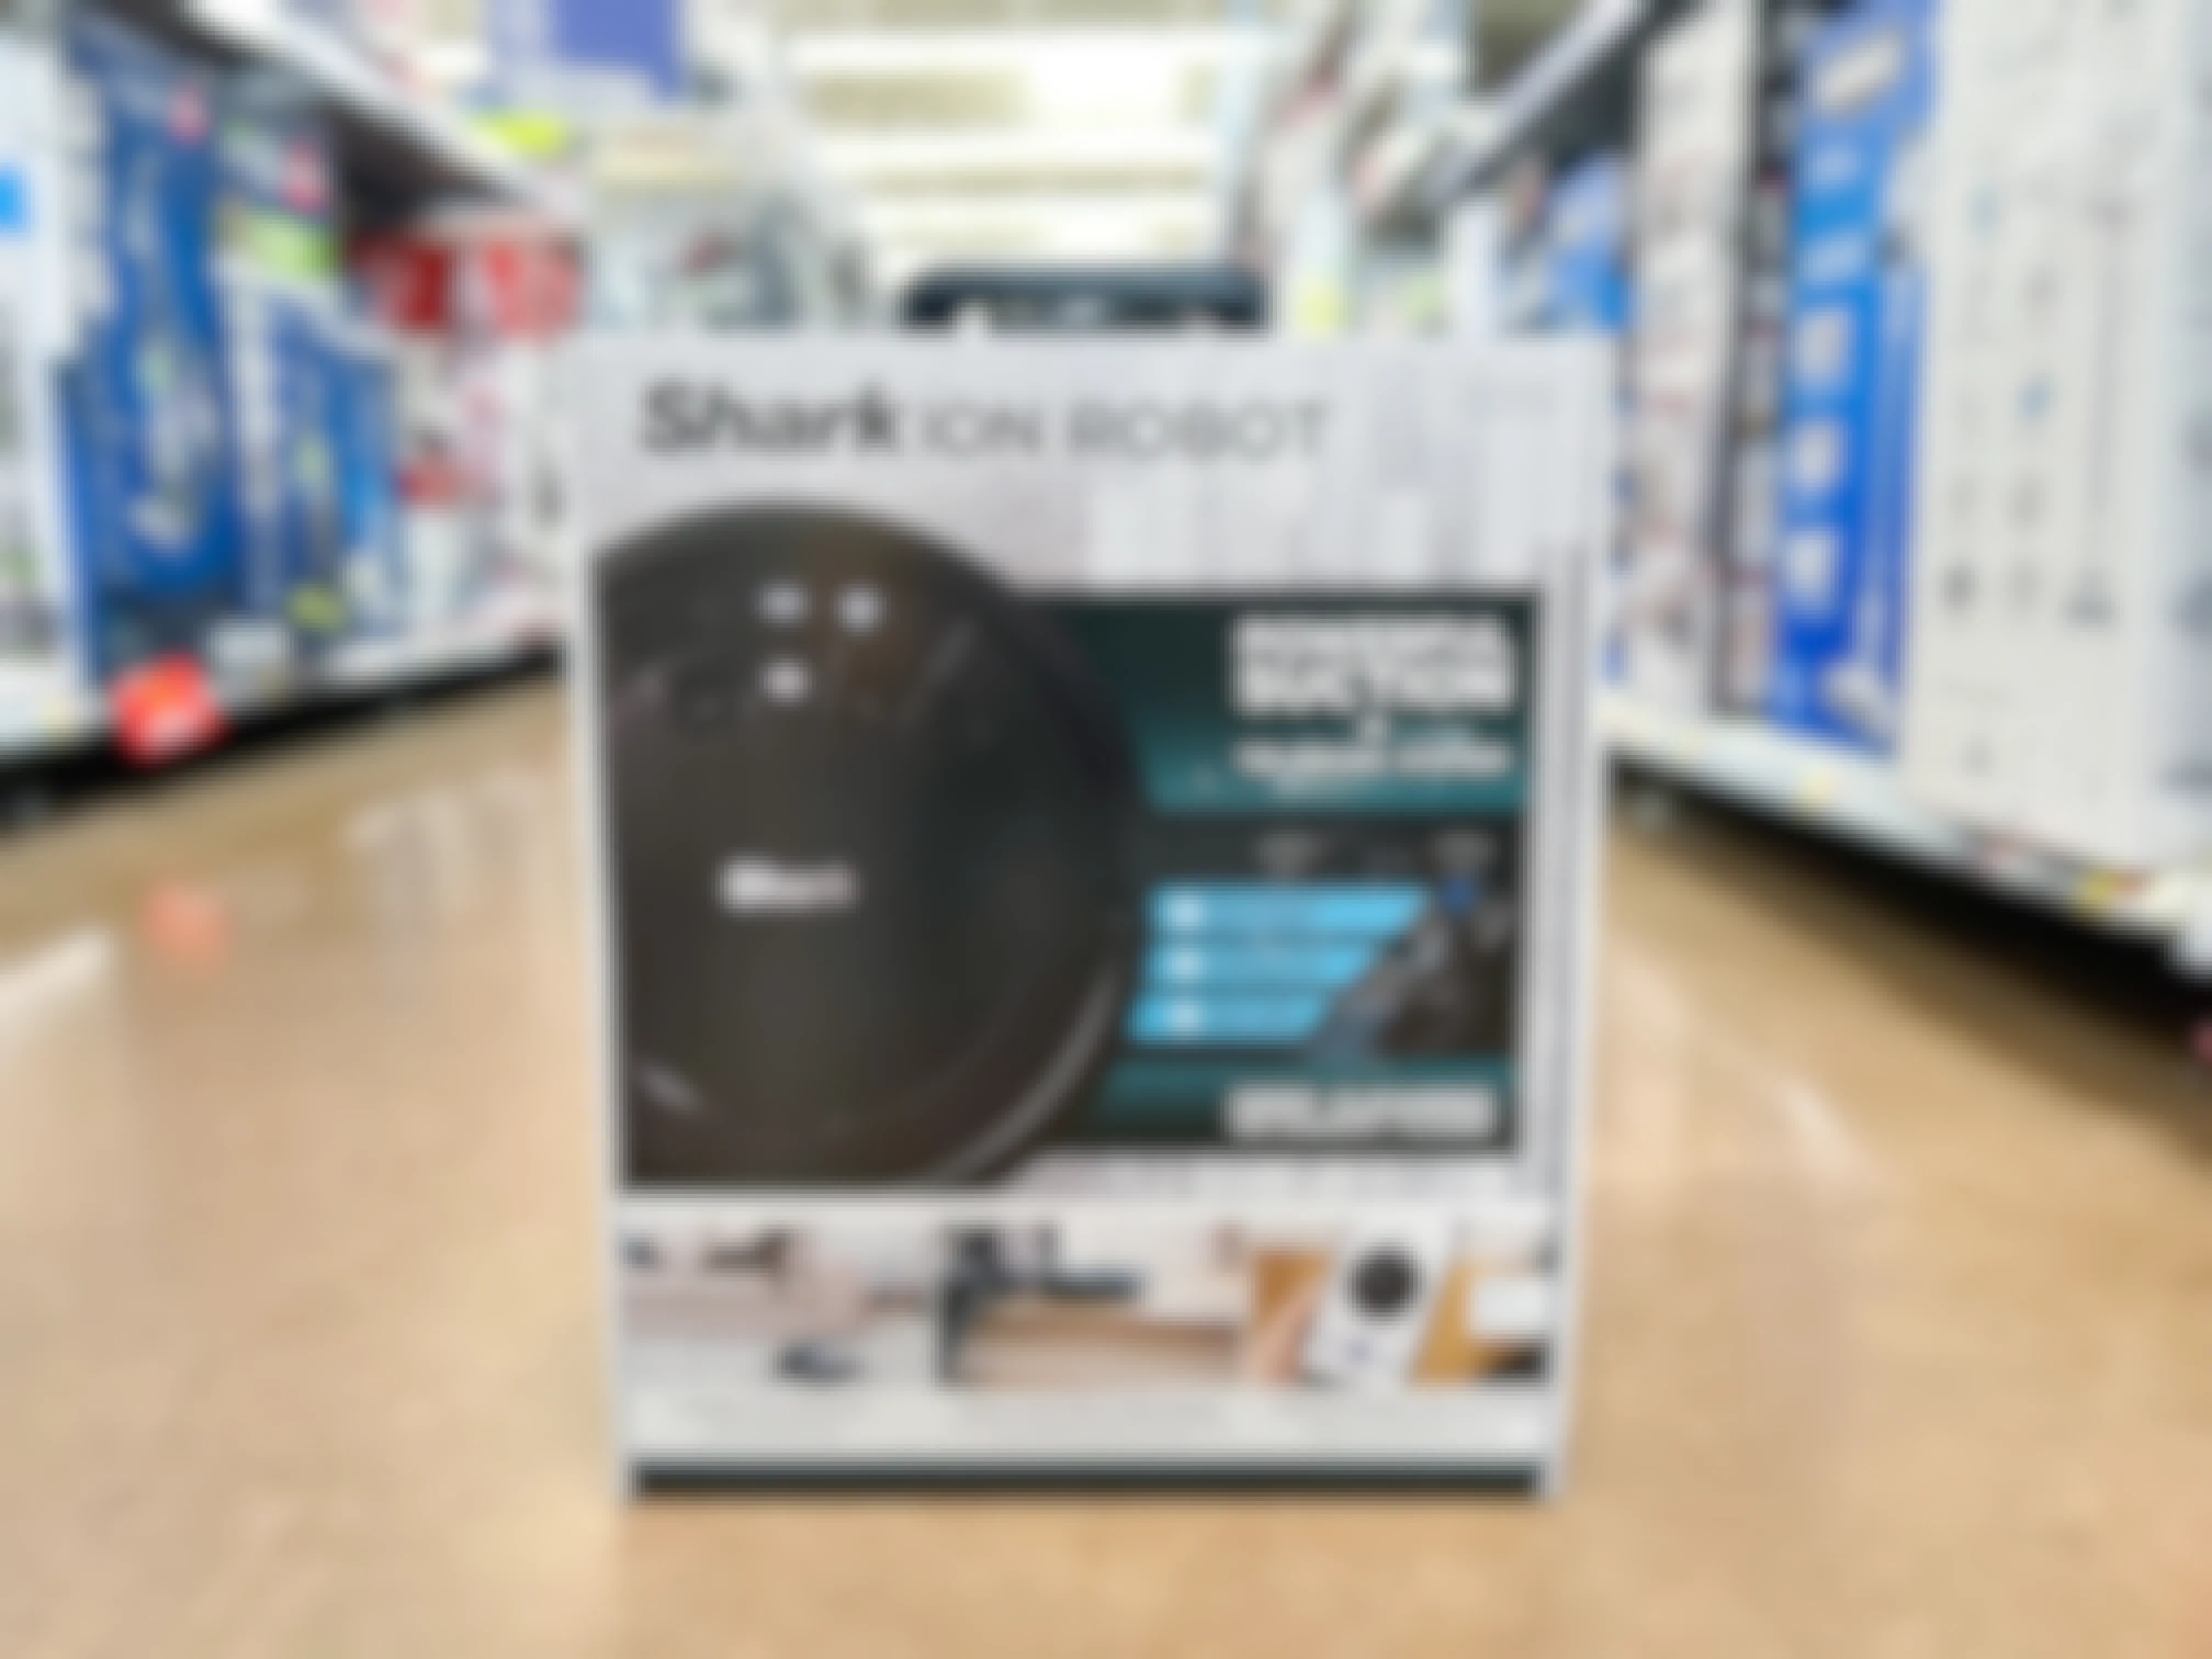 A Shark ion Robot vacuum box on the floor in the vacuum aisle of a store.